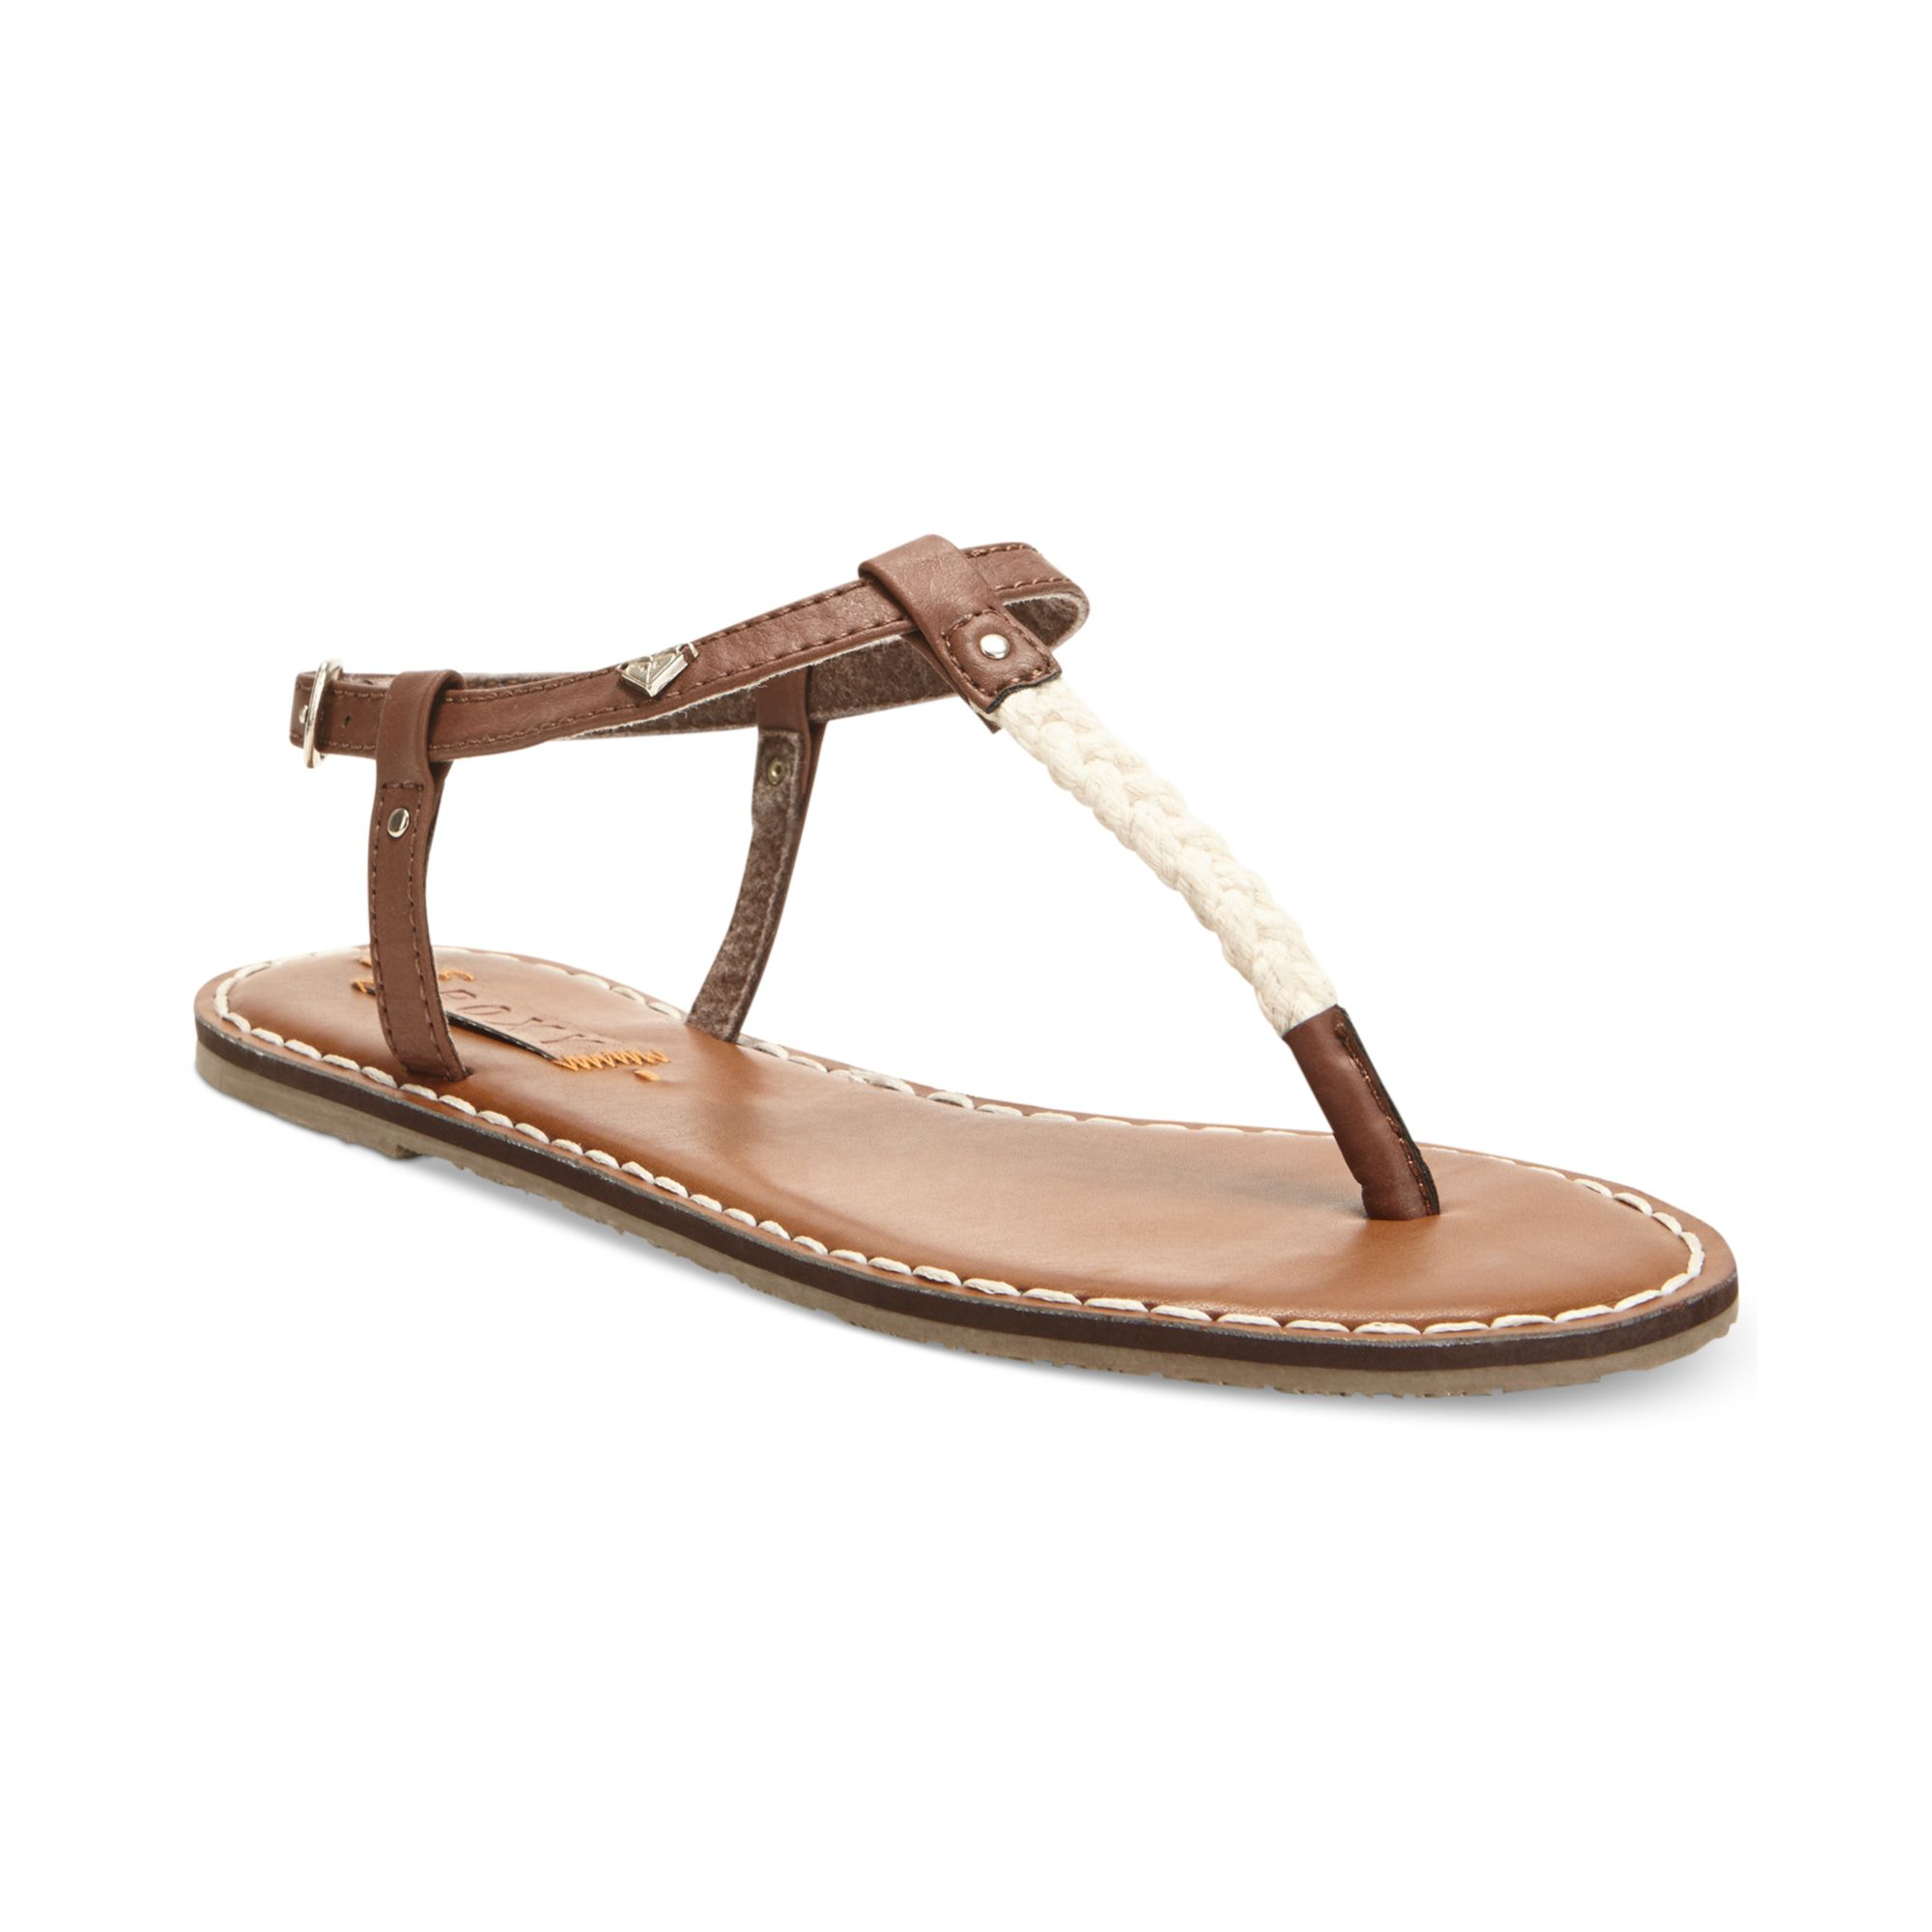 Lyst - Roxy Sparrow Tstrap Flat Thong Sandals in Brown